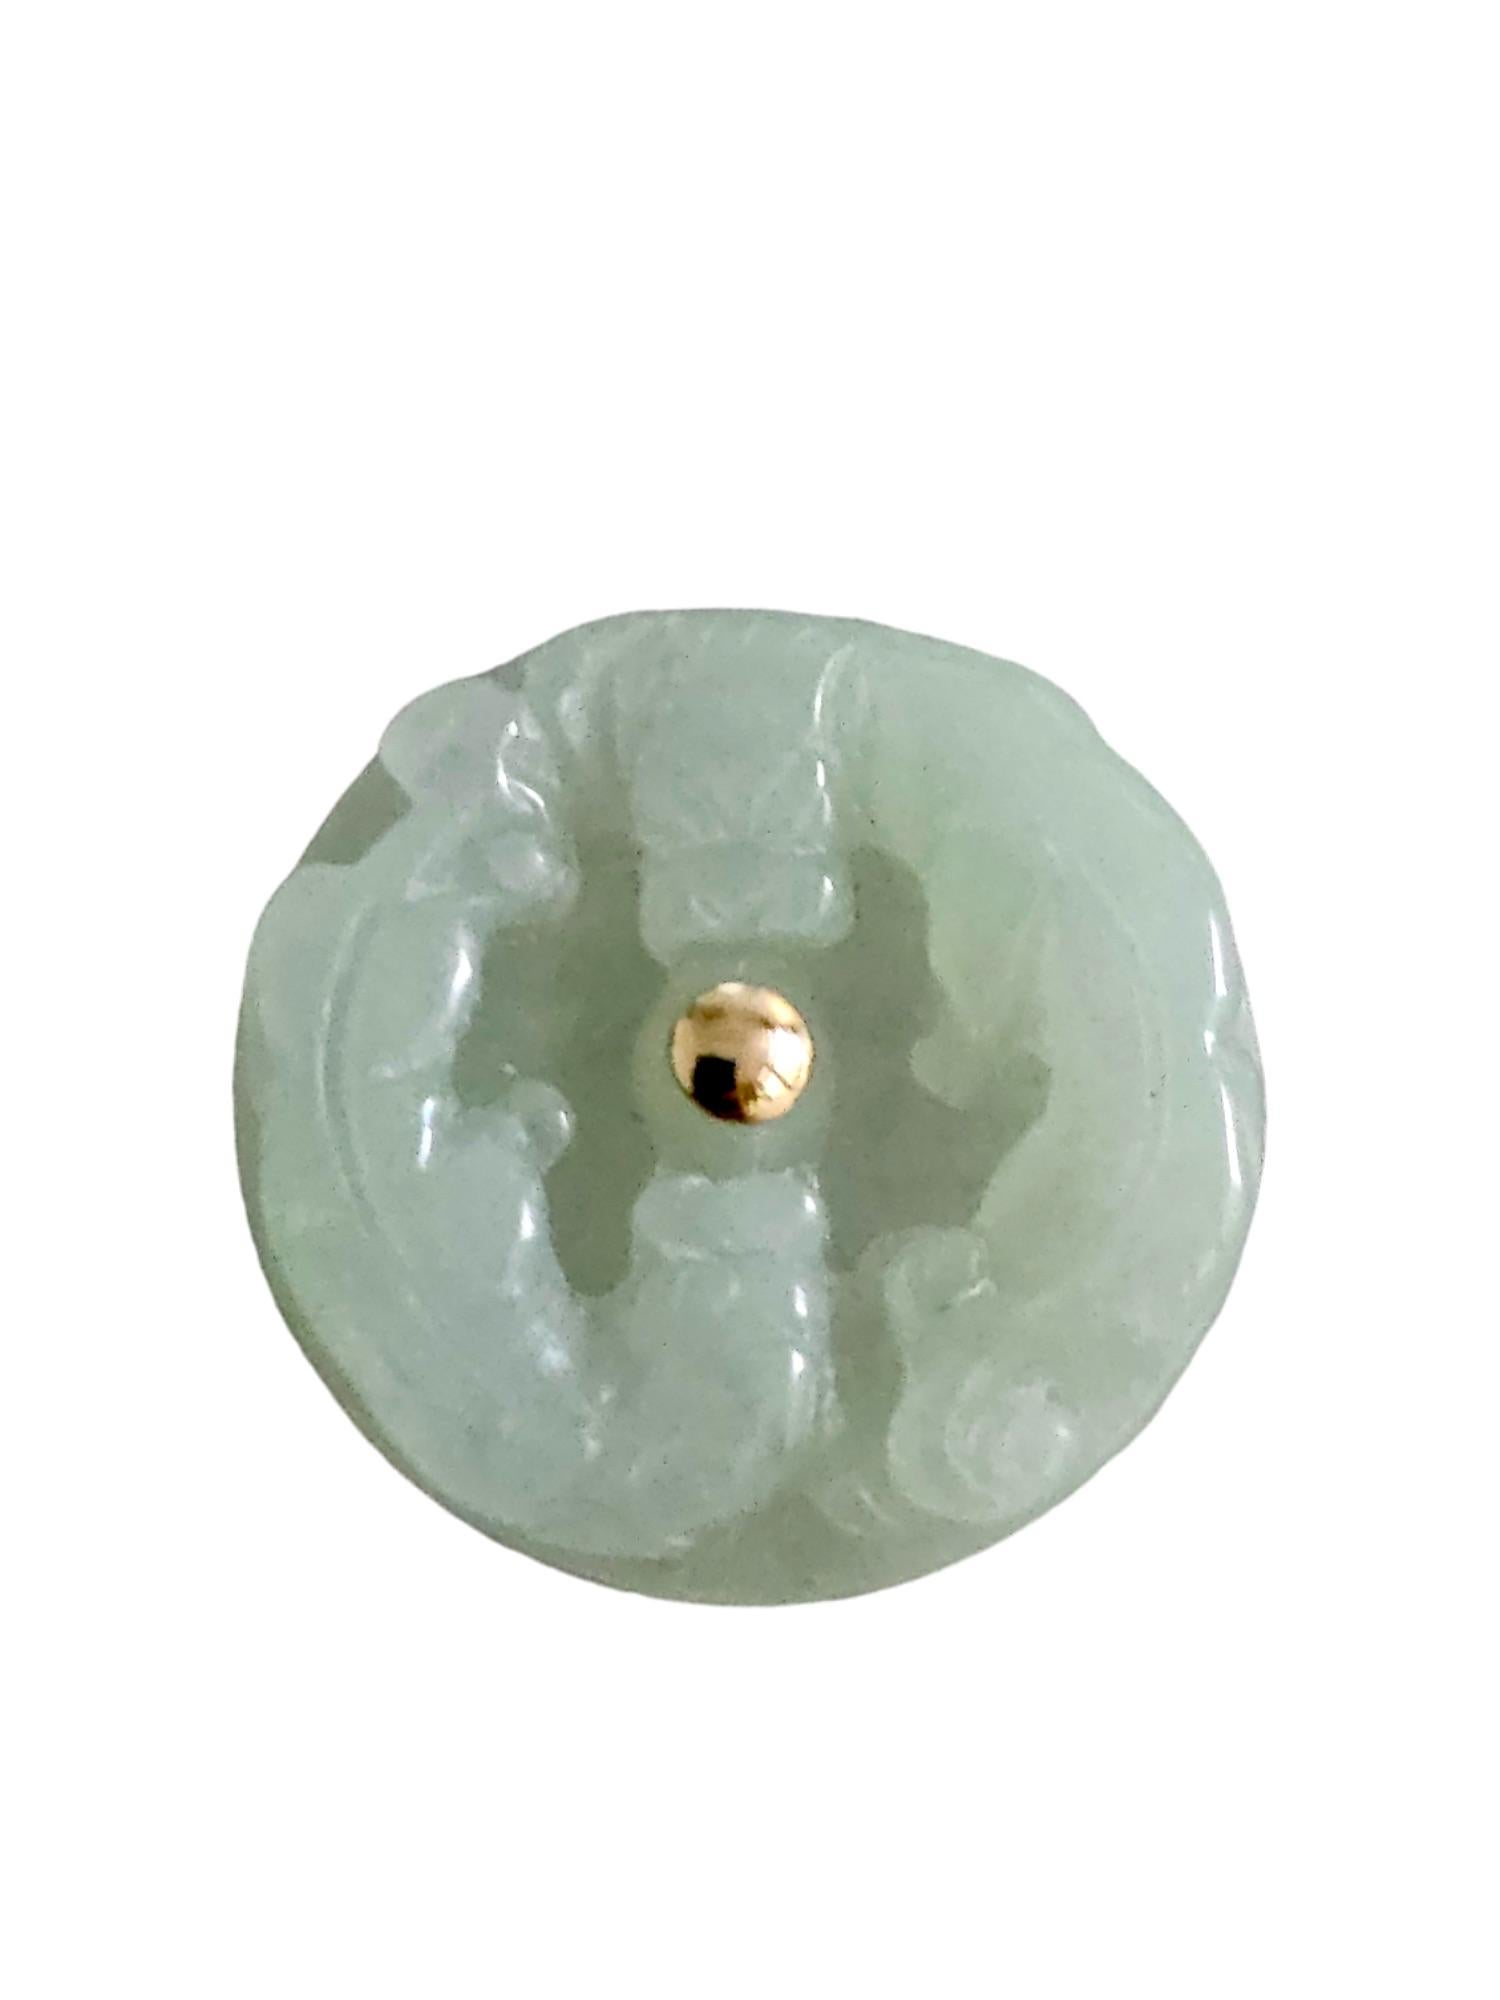 Twin Dragons Burmese Green Jade A-Jadeite Brooch/Lapel Pin with 14K Yellow Gold and Silver 925 Back

Using Handpicked and carved Burmese A-Jadeite. We carved our two dragons that face opposing directions, yet converge onto the center point. We